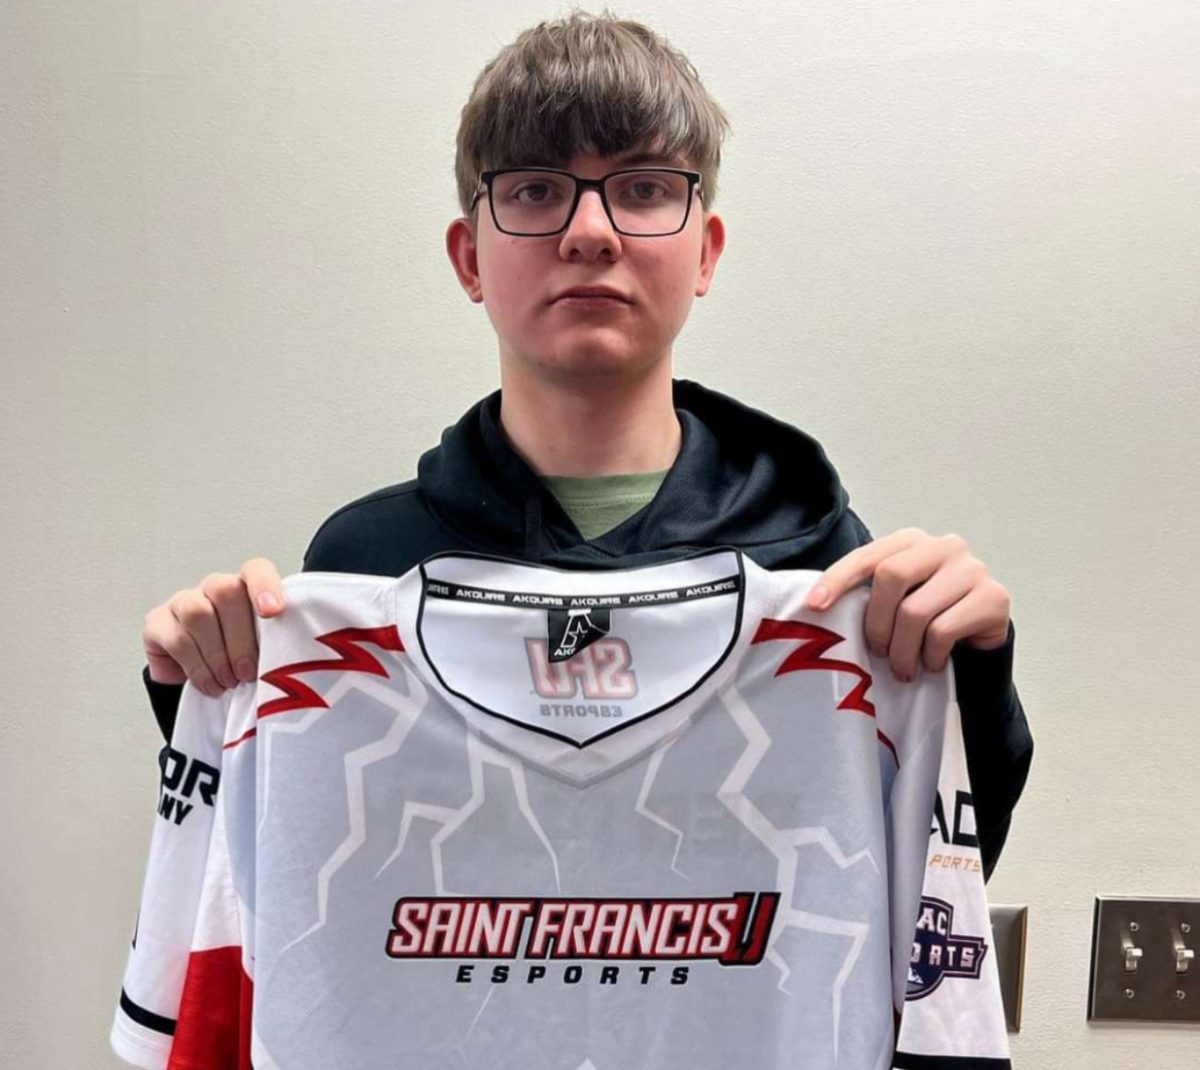 Jacob+Hvozdik+poses+with+his+St.+Francis+Esports+game+jersey%2C+where+he+earned+a+4-year+scholarship+where+he+will+major+in+Coding.+